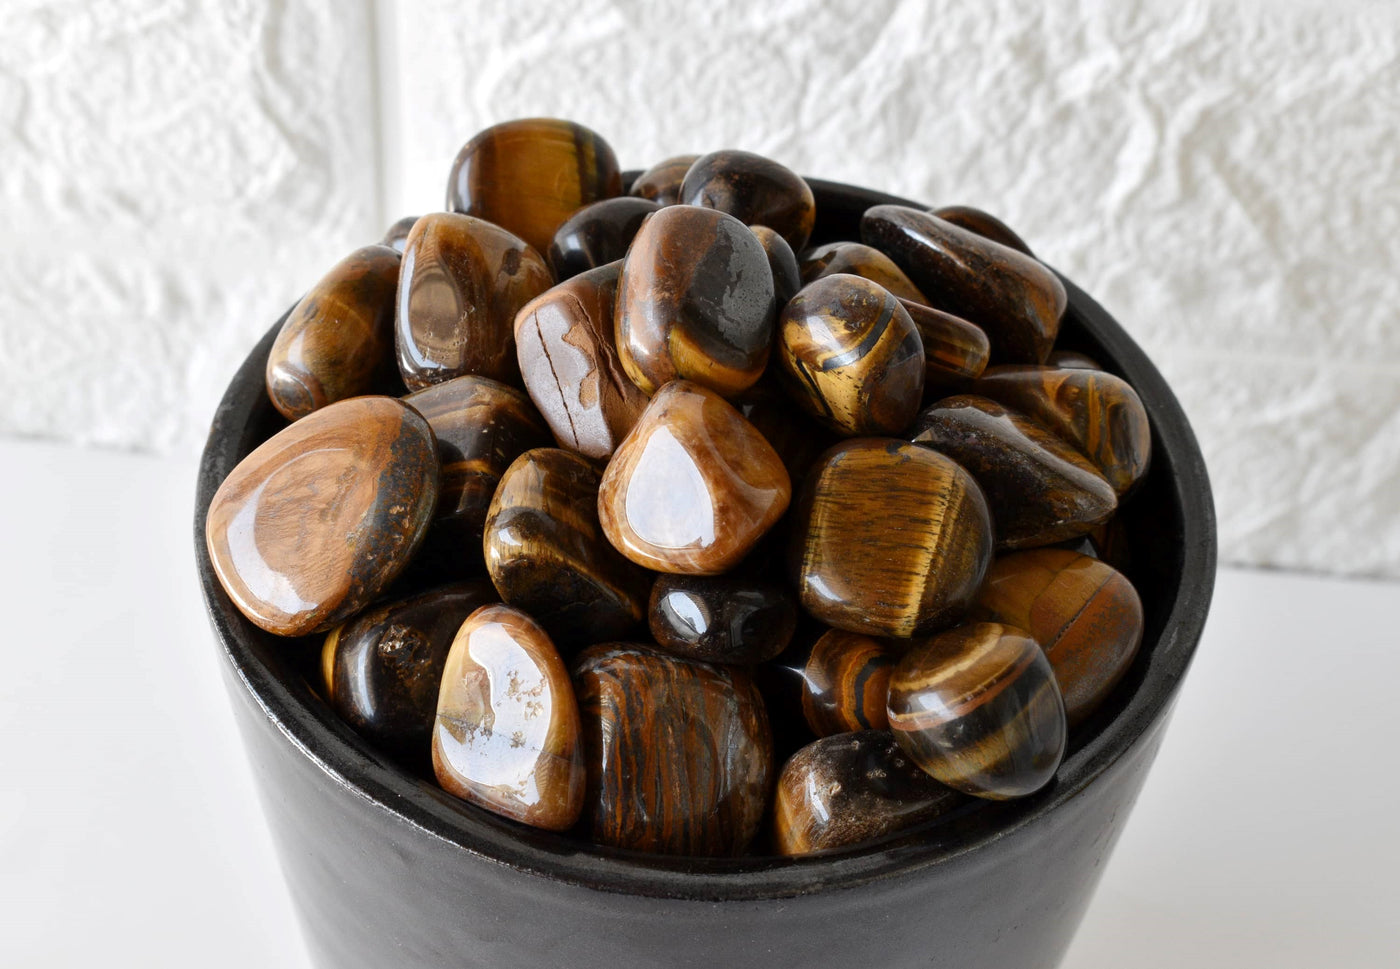 Tiger Eye Tumbled Crystals (Intuition and Protection)